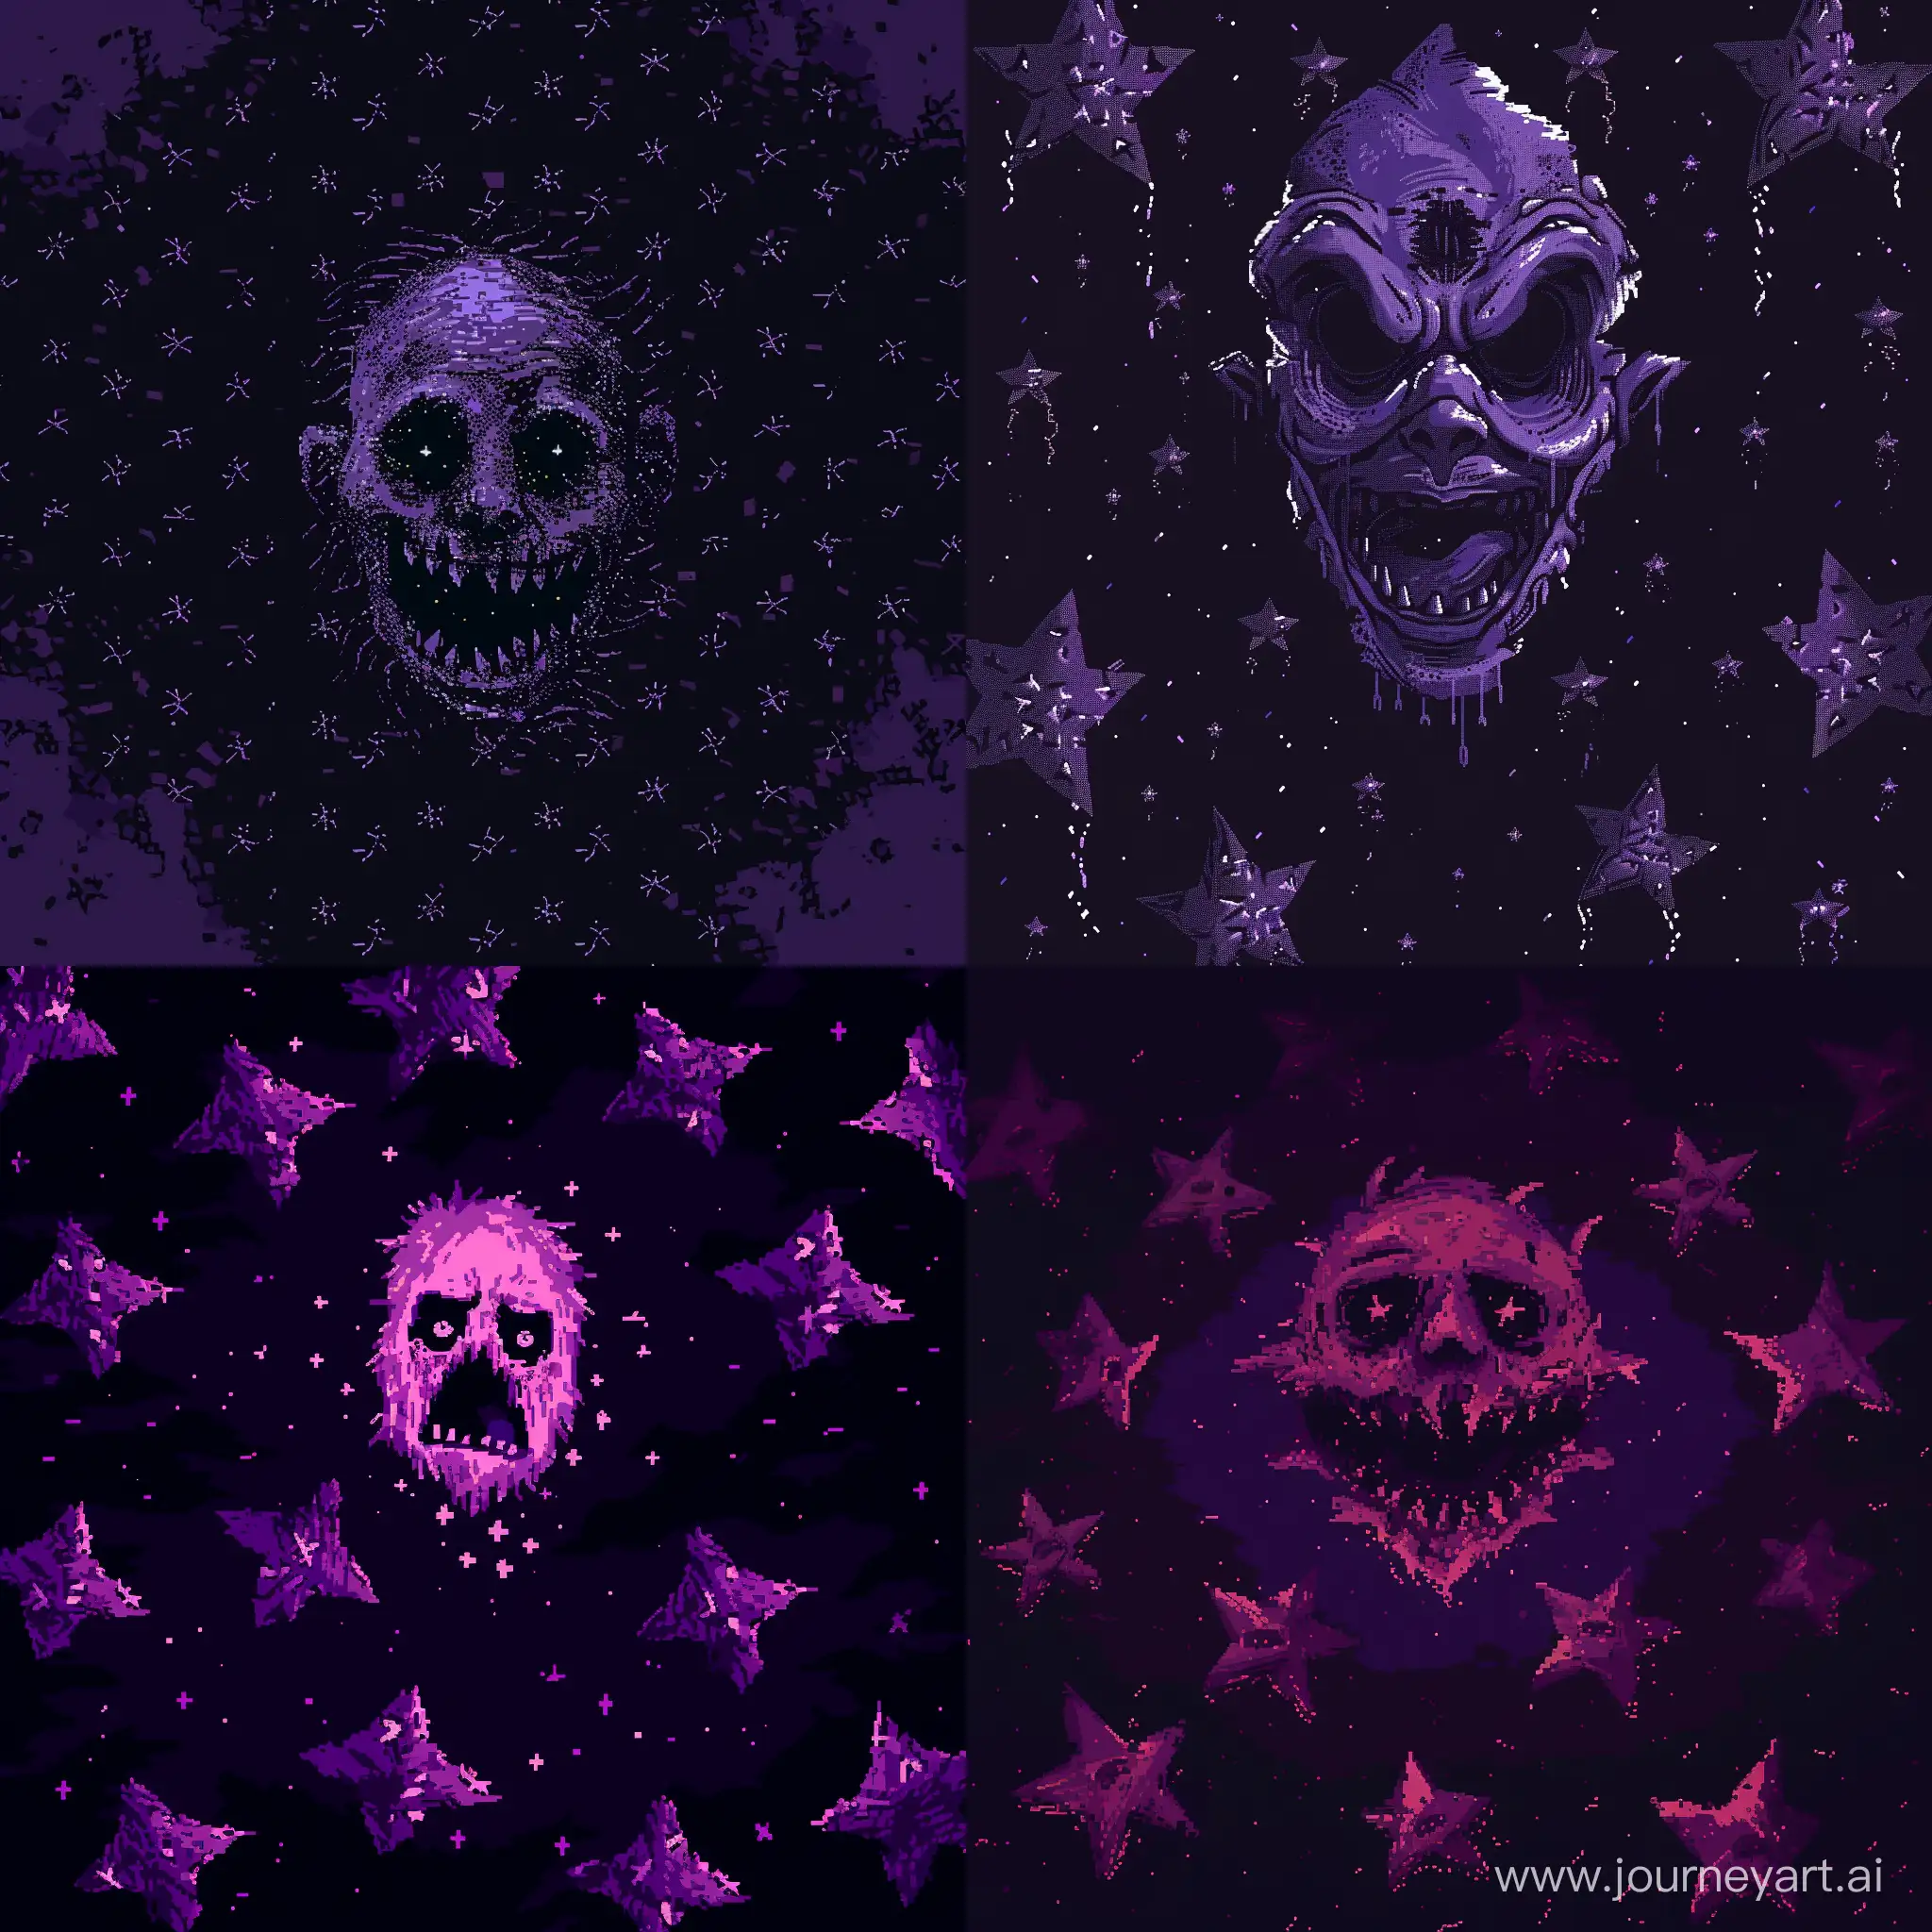 SCARY CREEPY PIXEL ART, 2d, purple-black background with repeated drawings of pixelated sloppy ugly stars, a painted creep ugly but at the same time attractive face in the middle in the style of old 1970-1980 console games, nes, as low-poly as possible with a small number of details, bloom, Y2K era, big pixelated image, VERY FEW DETAILS, VERY MINIMALISTIC, darkened scary picture